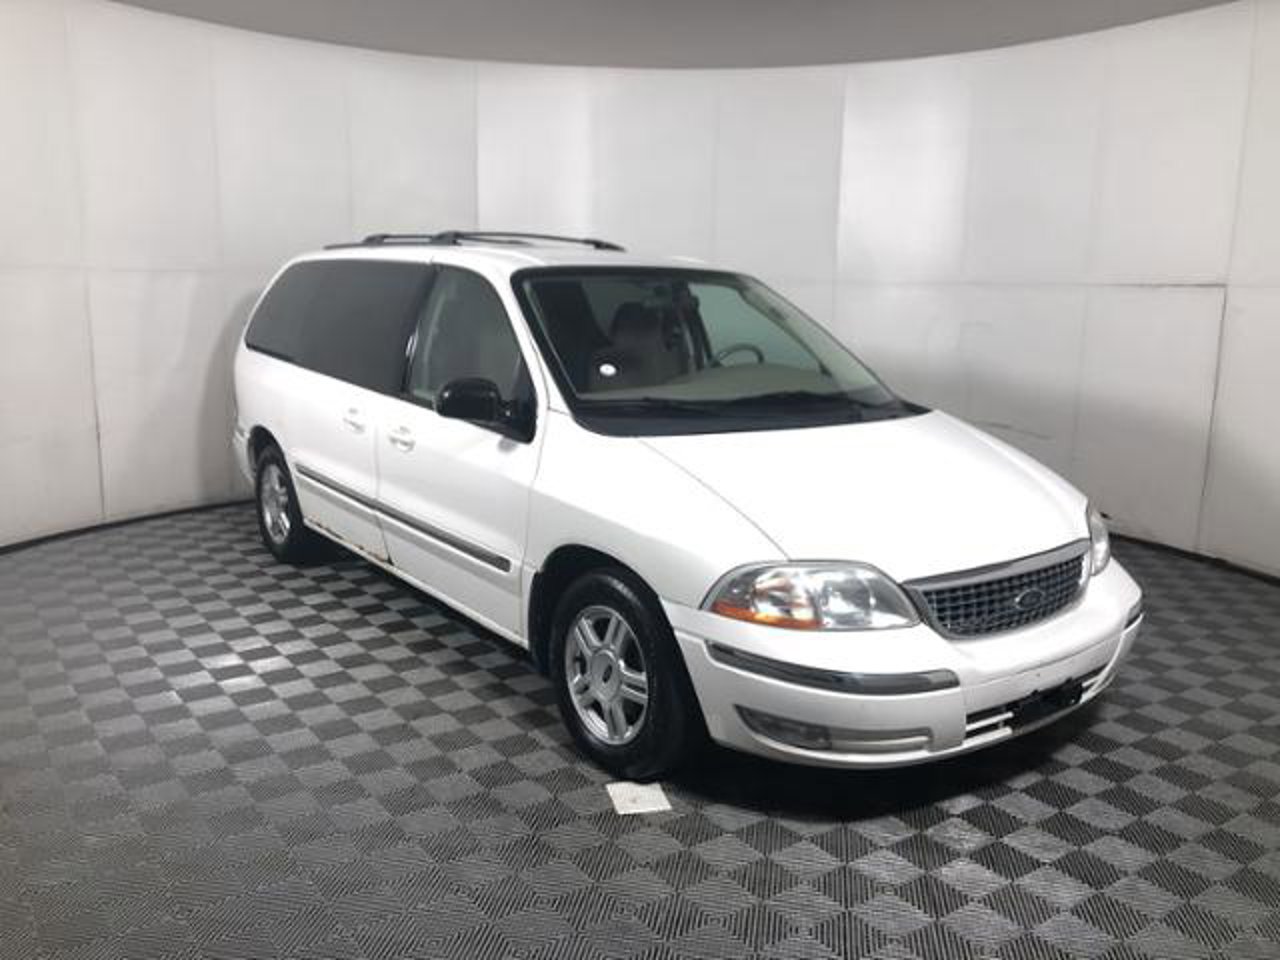 2003 Ford Windstar Wagon SE 2FMZA52483BB76231 | Hubler Automotive Group  Indianapolis, IN